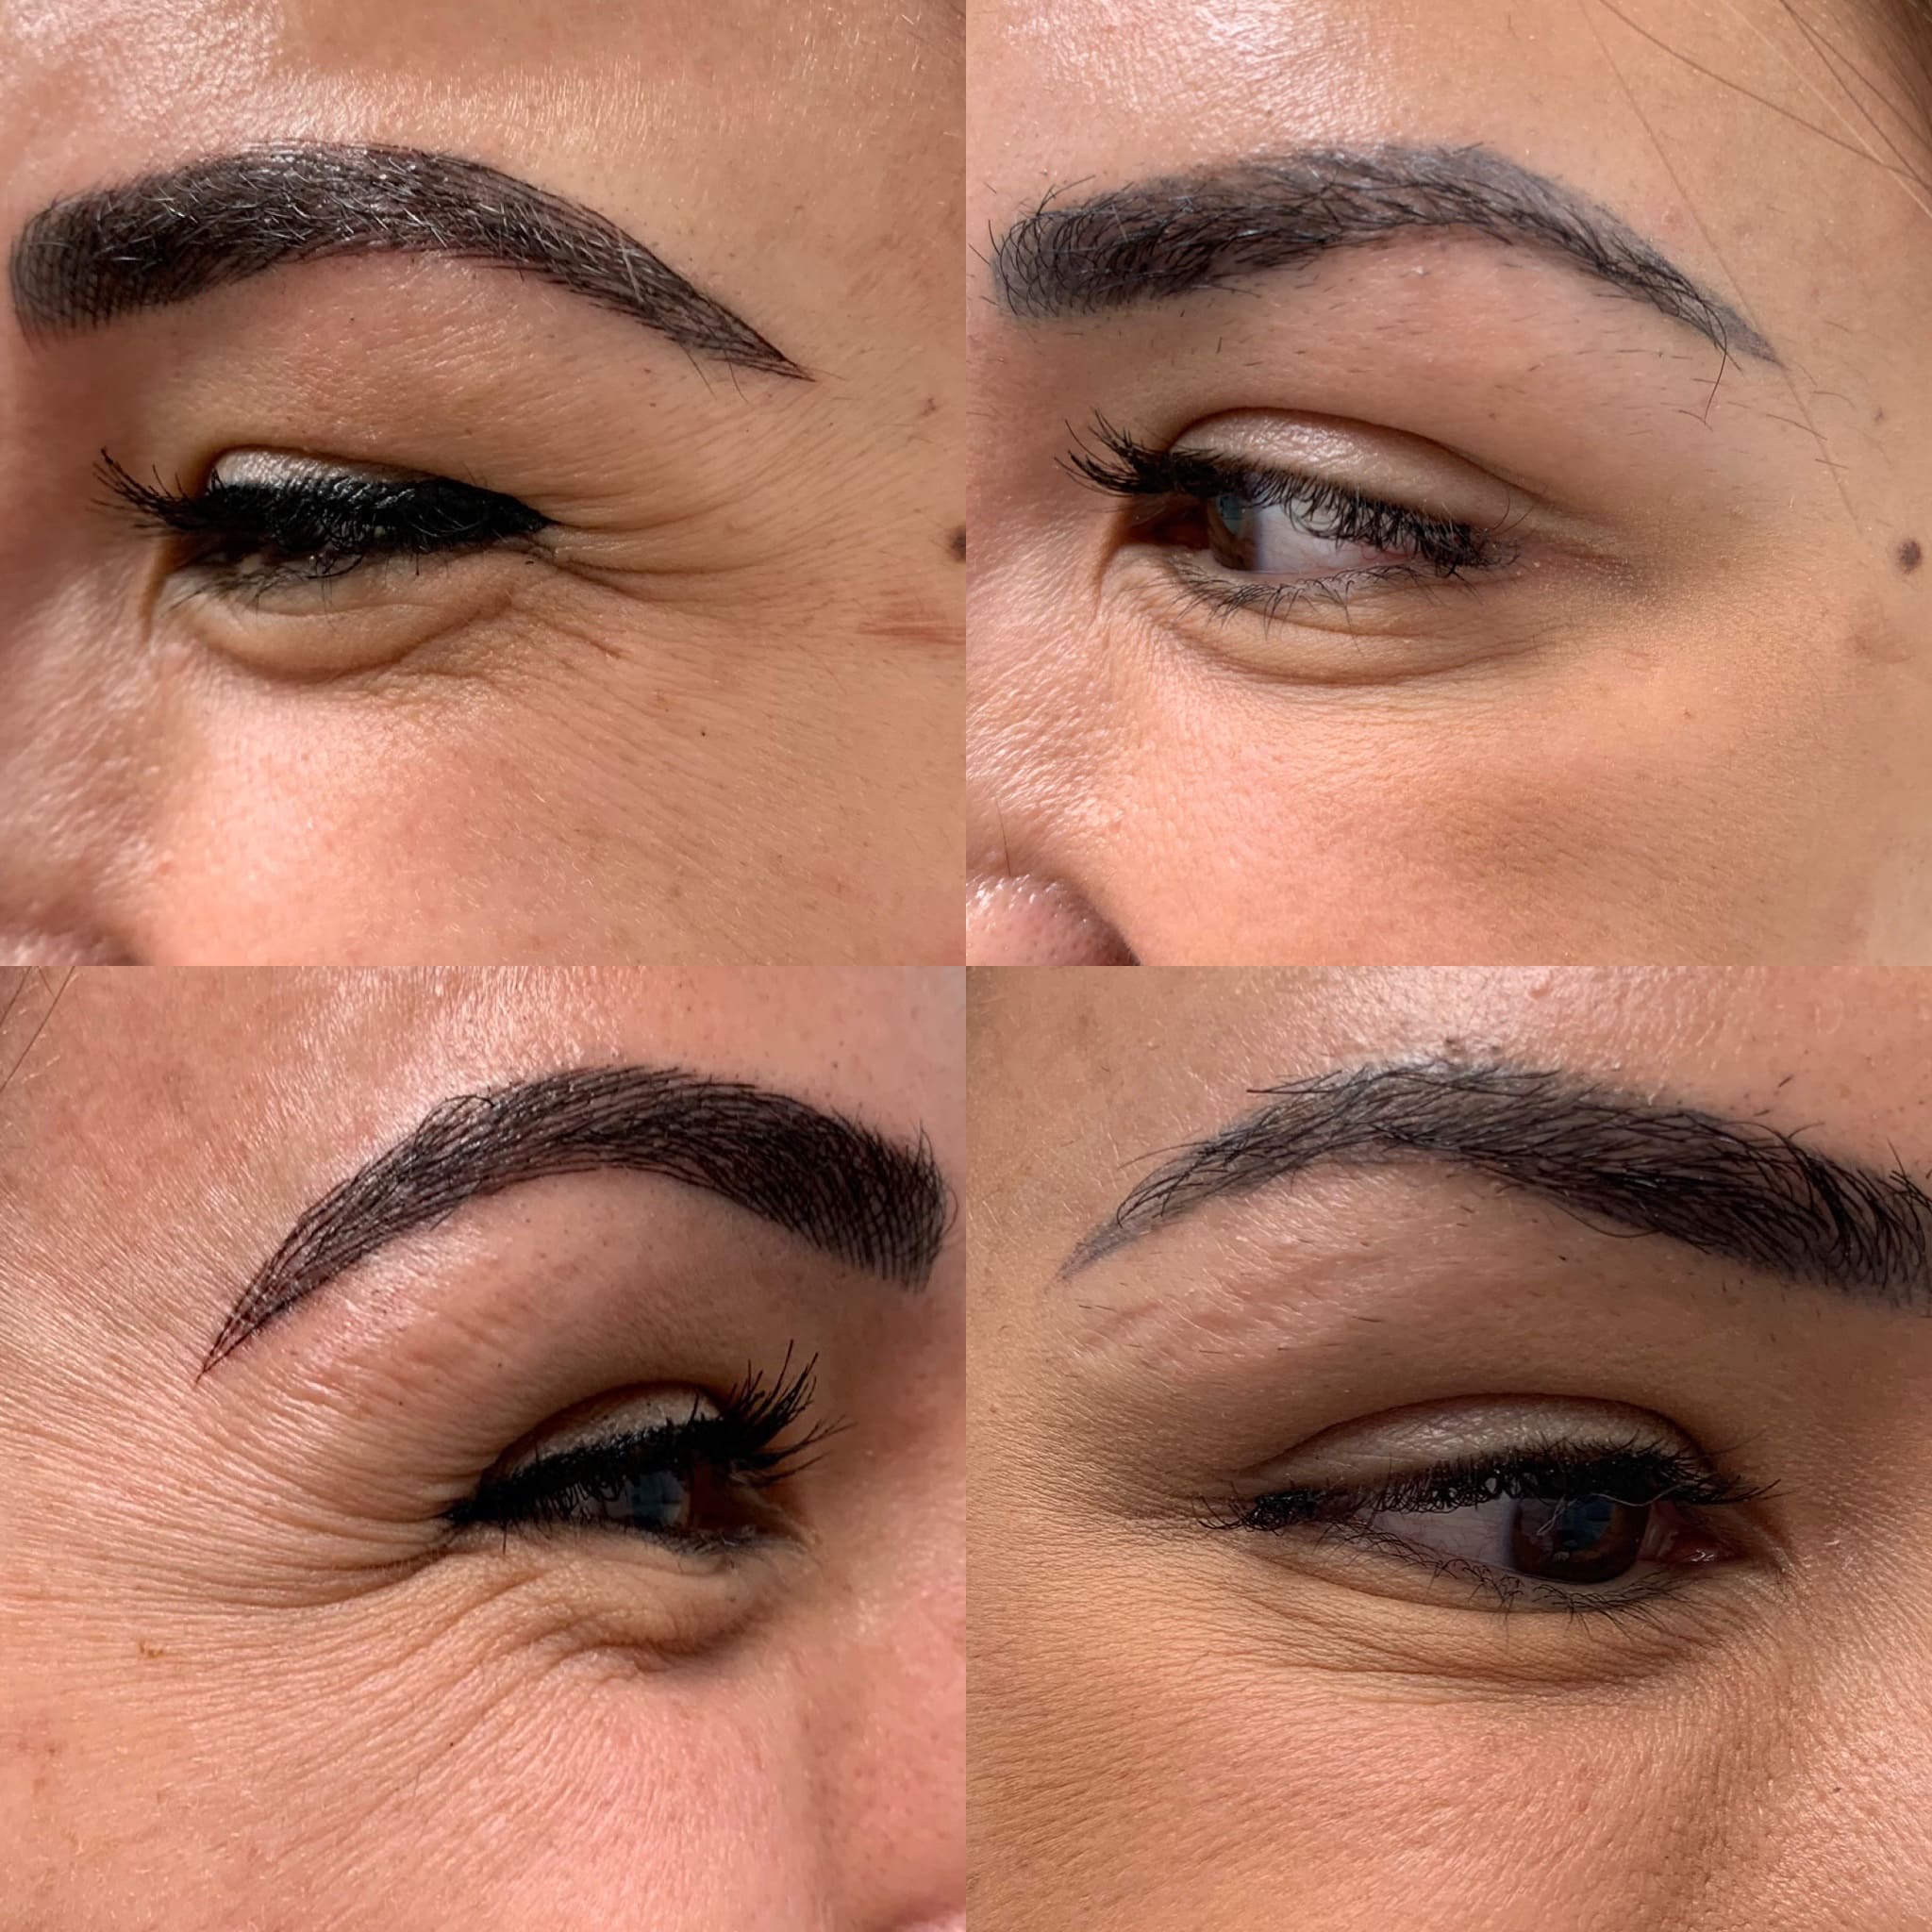 Before and After treatment results on Eye Jelly roll | Beauty Boost Med Spa in Newport Beach, CA